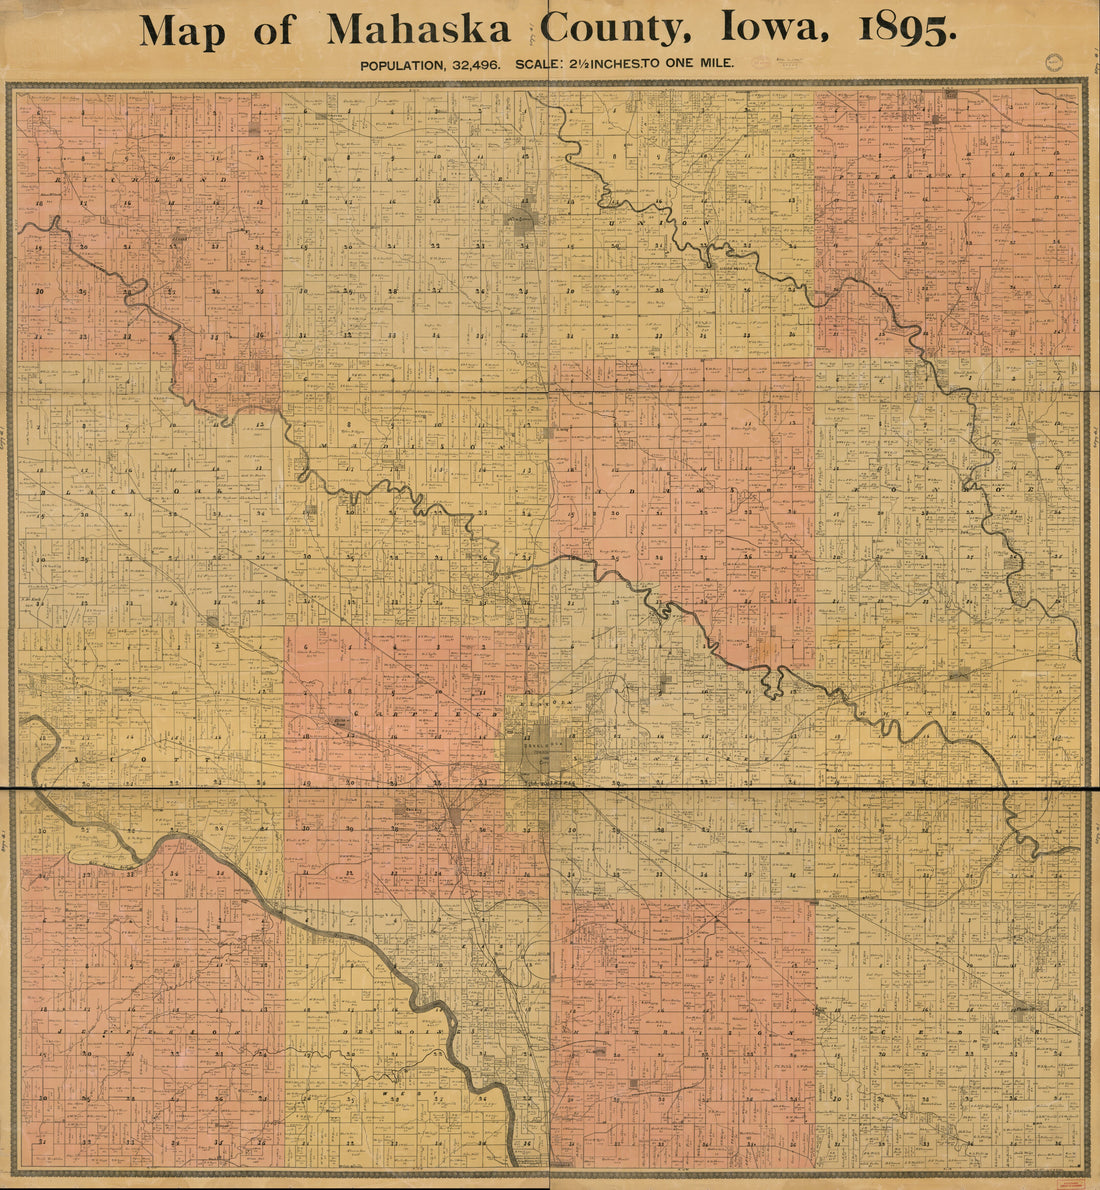 This old map of Map of Mahaska County, Iowa, from 1895 was created by E. H. Gibbs in 1895